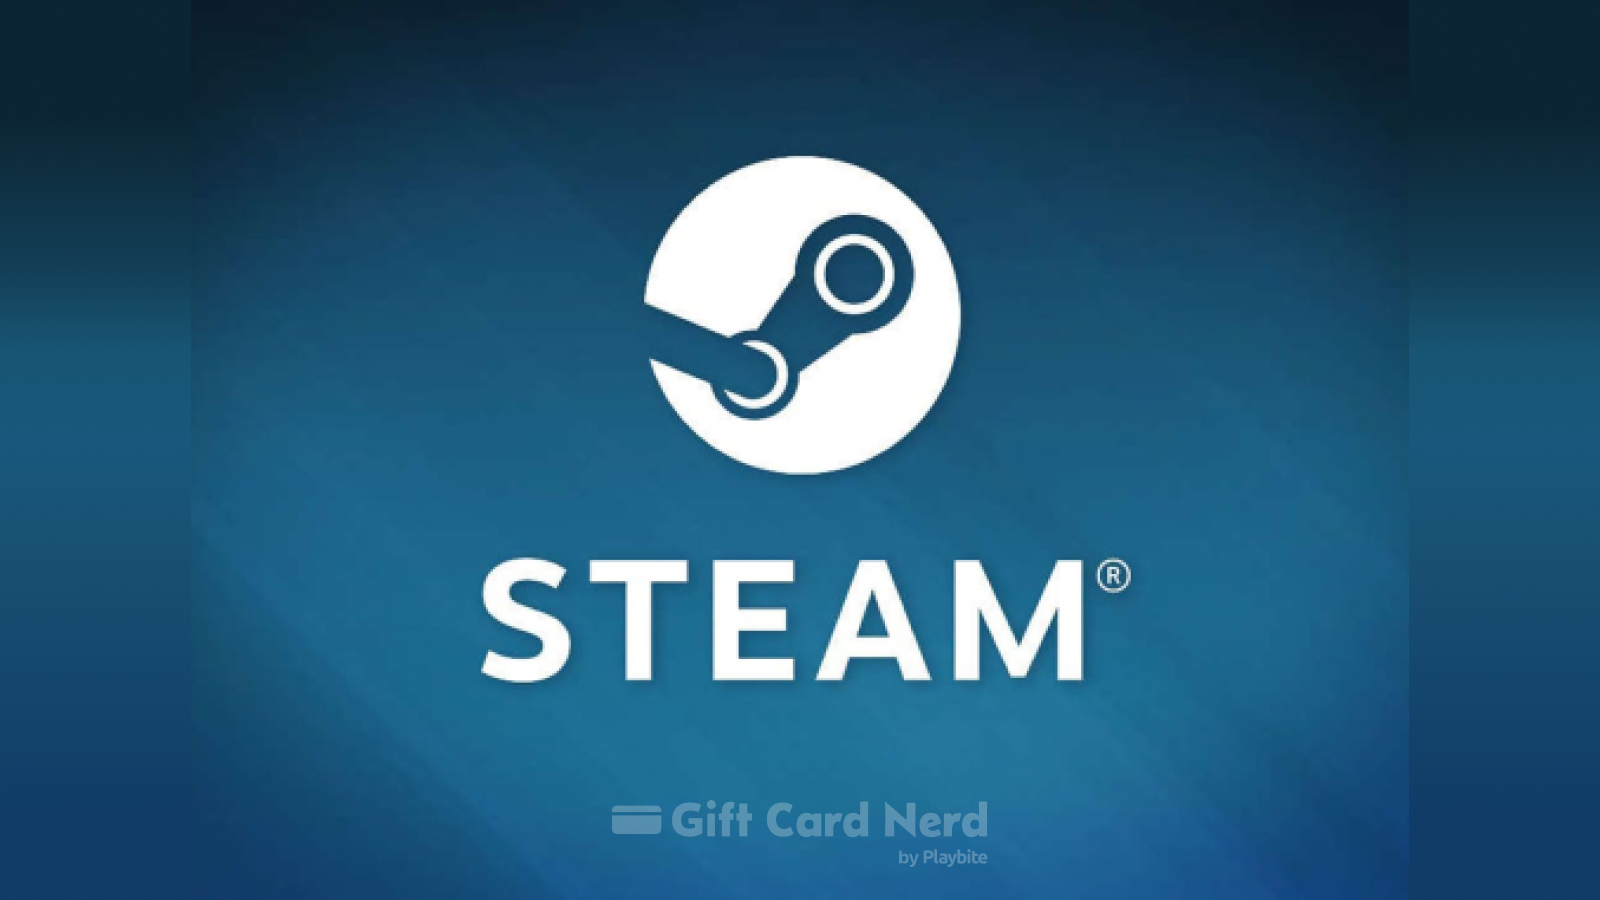 Can I Use a Steam Gift Card on Paypal?